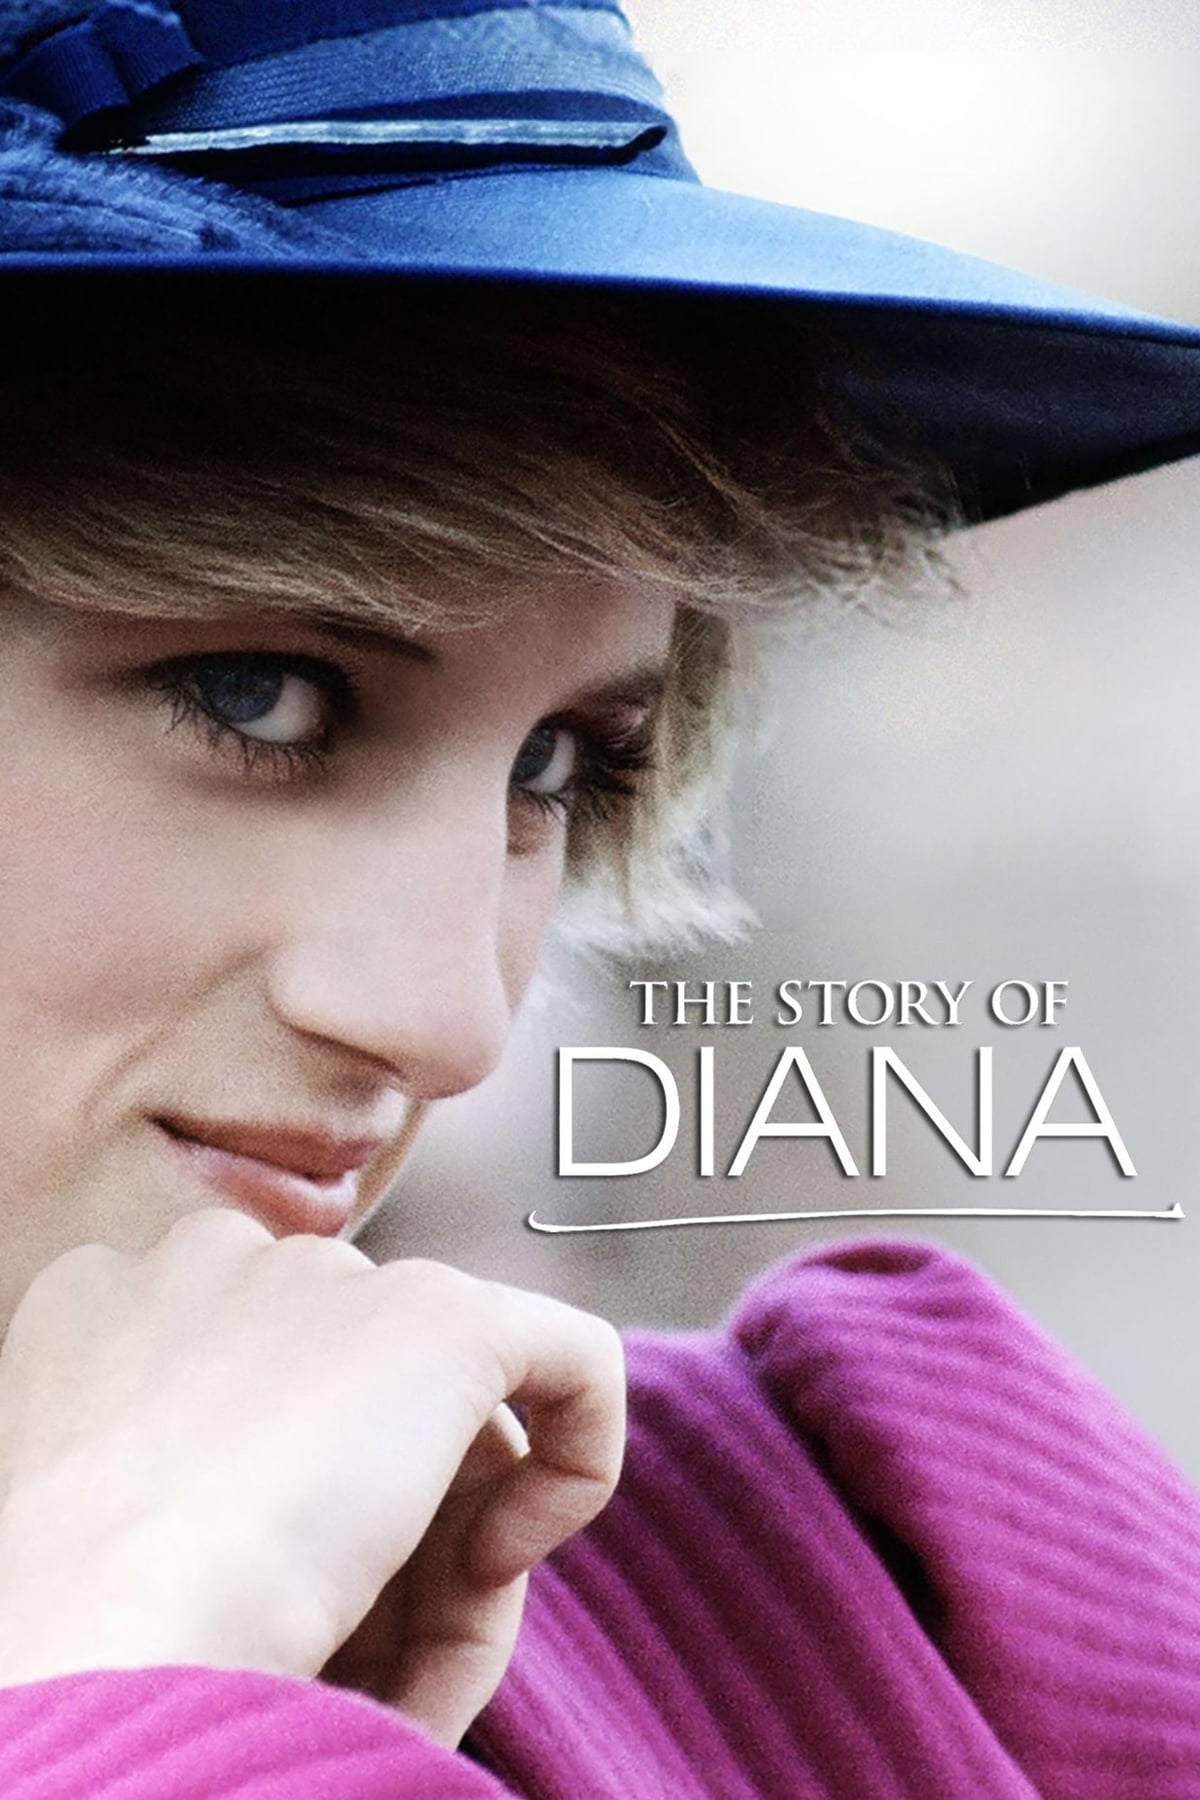 The Story of Diana TV Shows About Prince